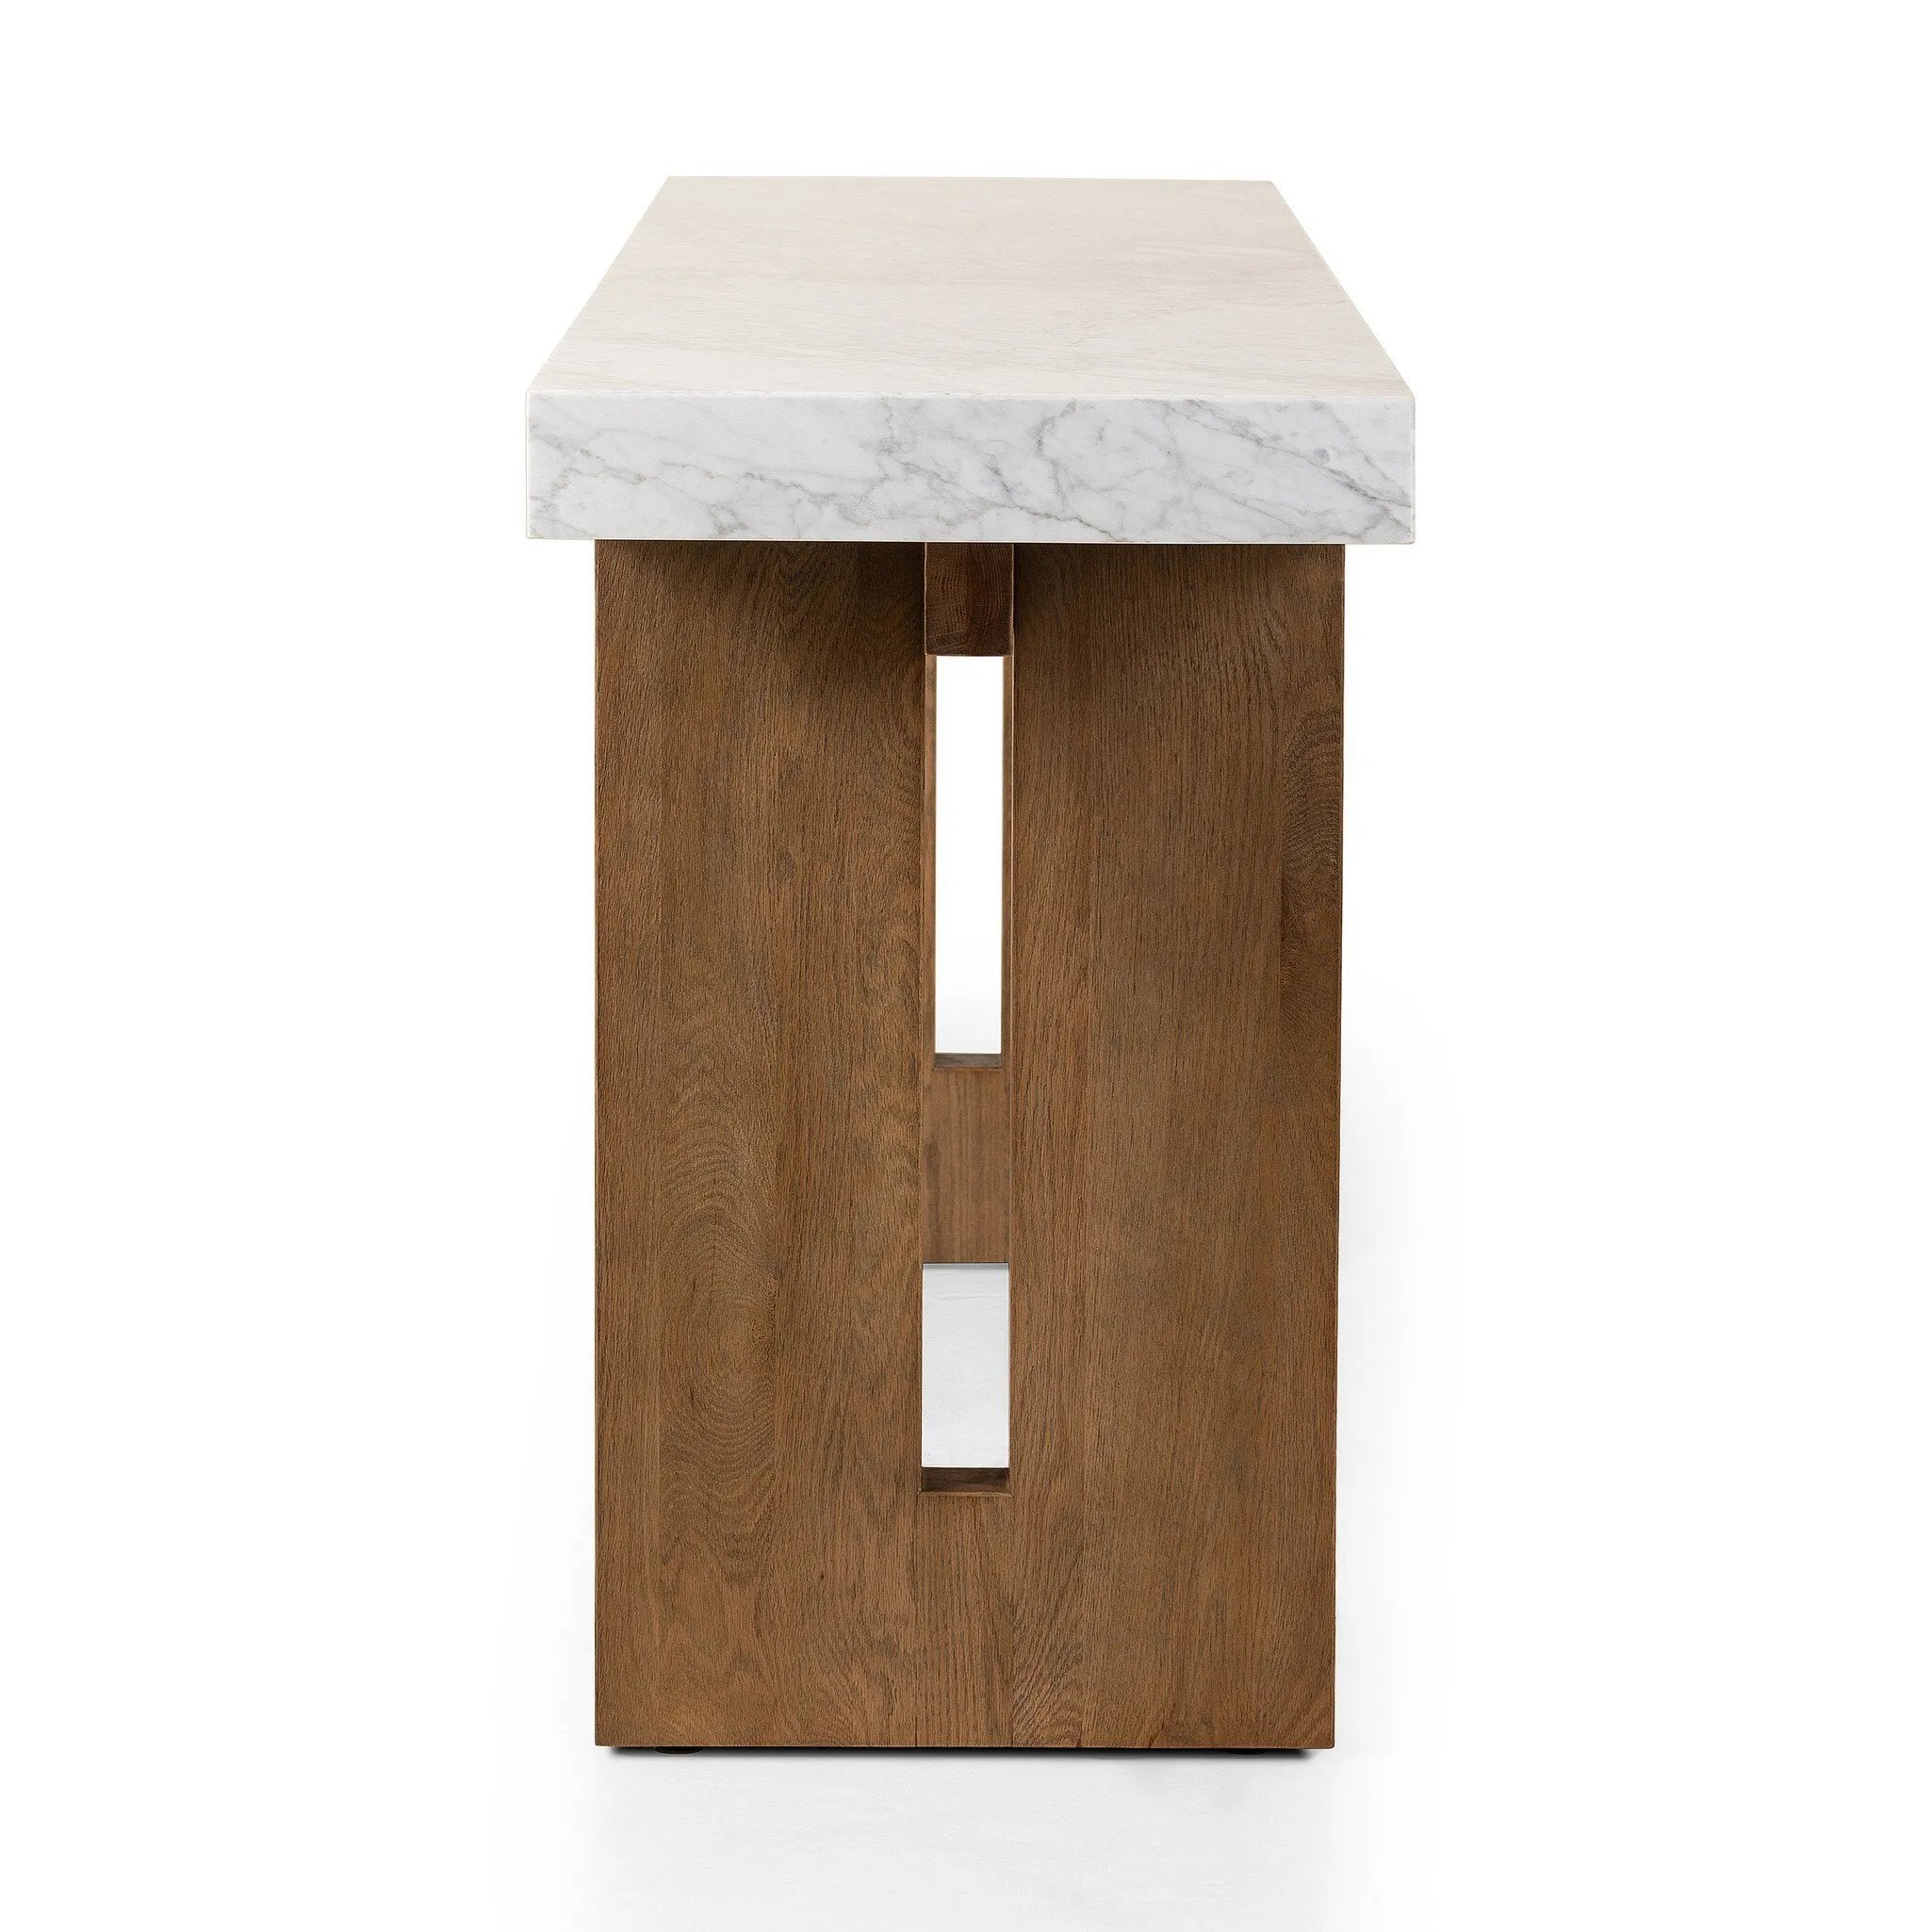 Structured and geometric, an open-style console table pairs smoked oak veneer with white marble, for a sophisticated material mix.Collection: Hughe Amethyst Home provides interior design, new home construction design consulting, vintage area rugs, and lighting in the Omaha metro area.